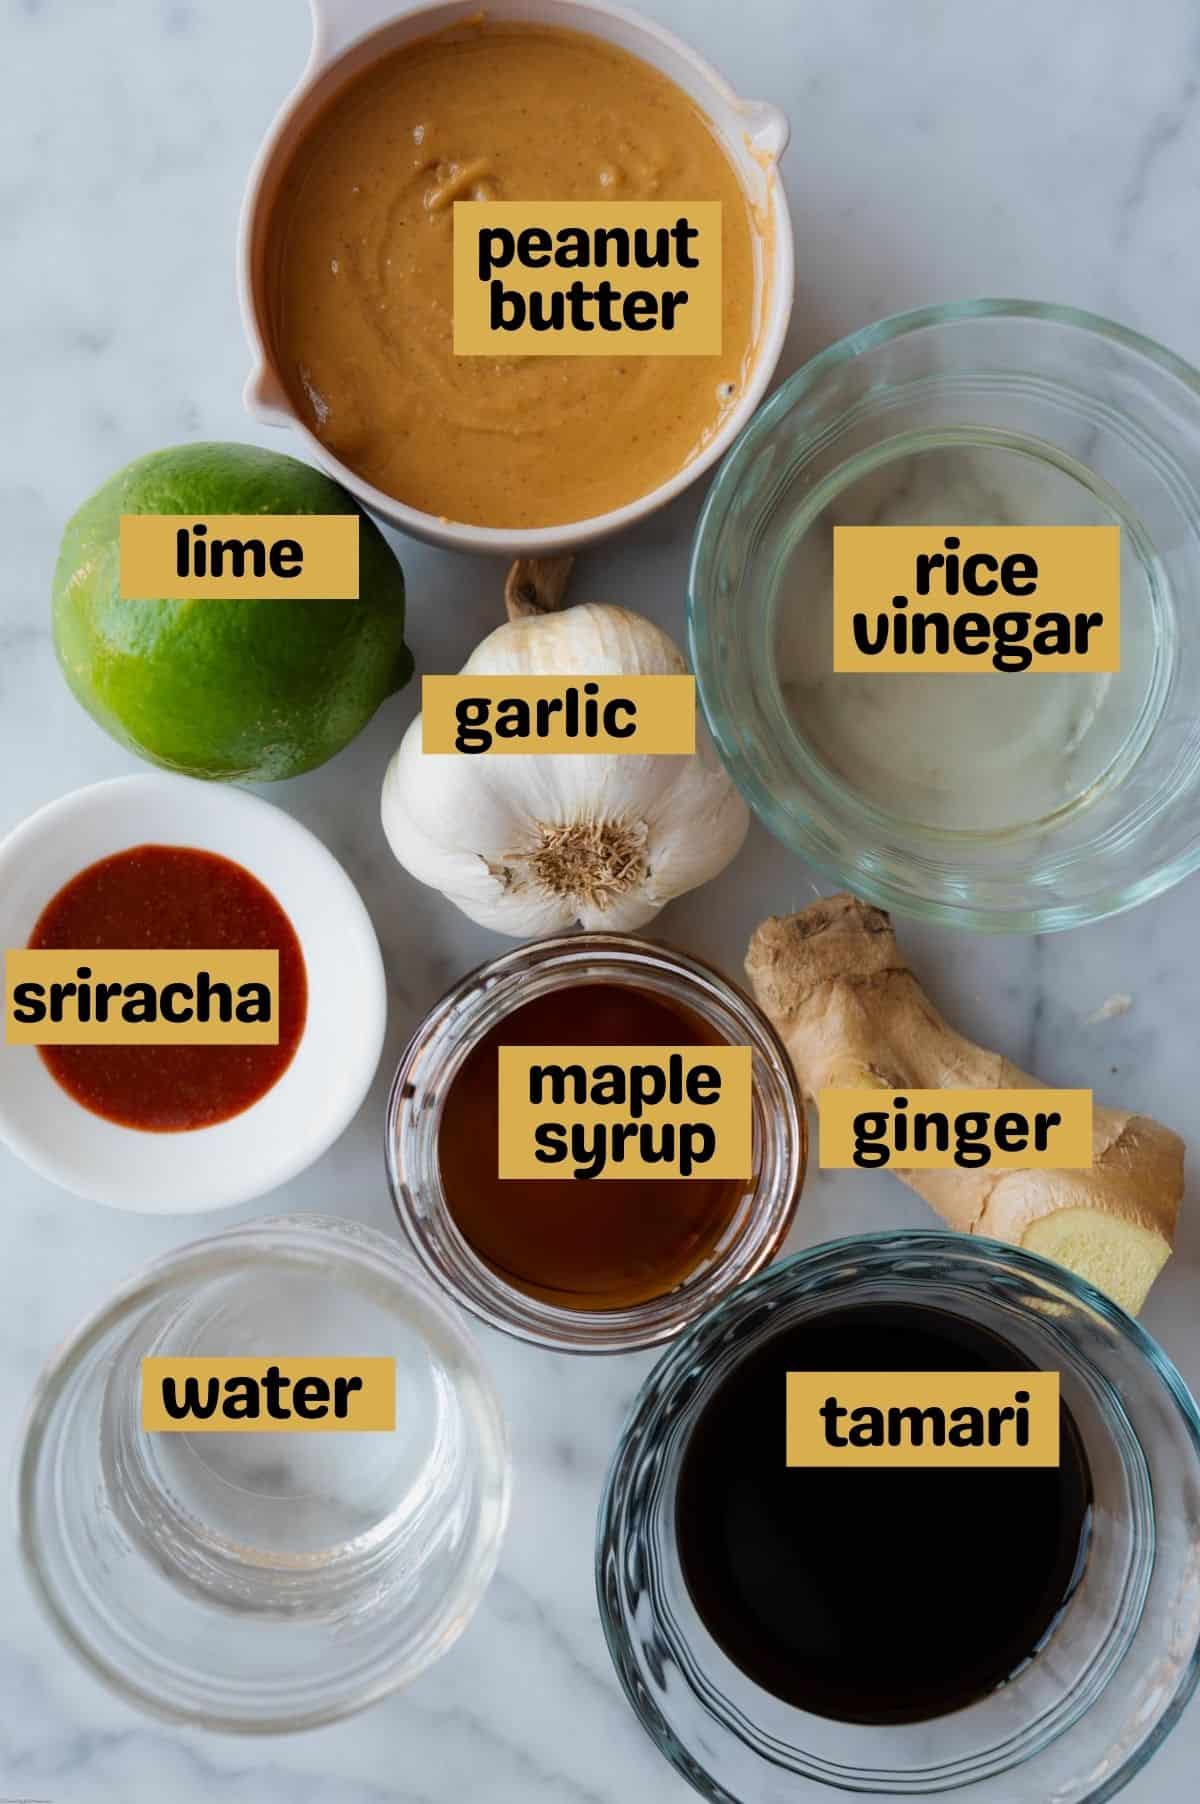 Peanut butter in a white bowl, one lime, one head garlic, one piece of ginger, rice vinegar in a glass bowl, sriracha is a white bowl, maple syrup in a glass bowl, tamari in a glass bowl, and water in a glass bowl. On a white marble tile.